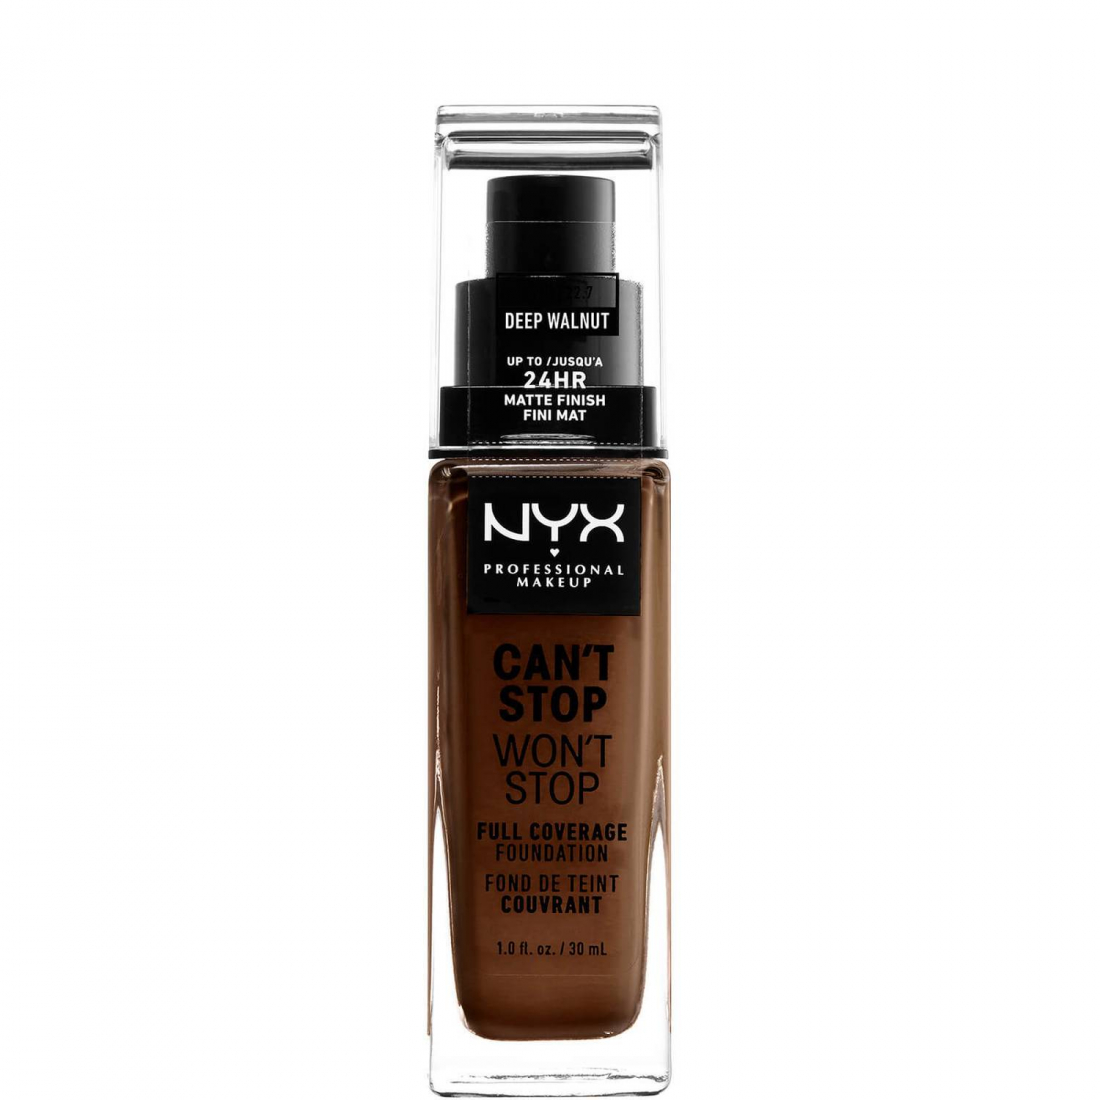 'Can't Stop Won't Stop Full Coverage' Foundation - Deep Walnut 30 ml